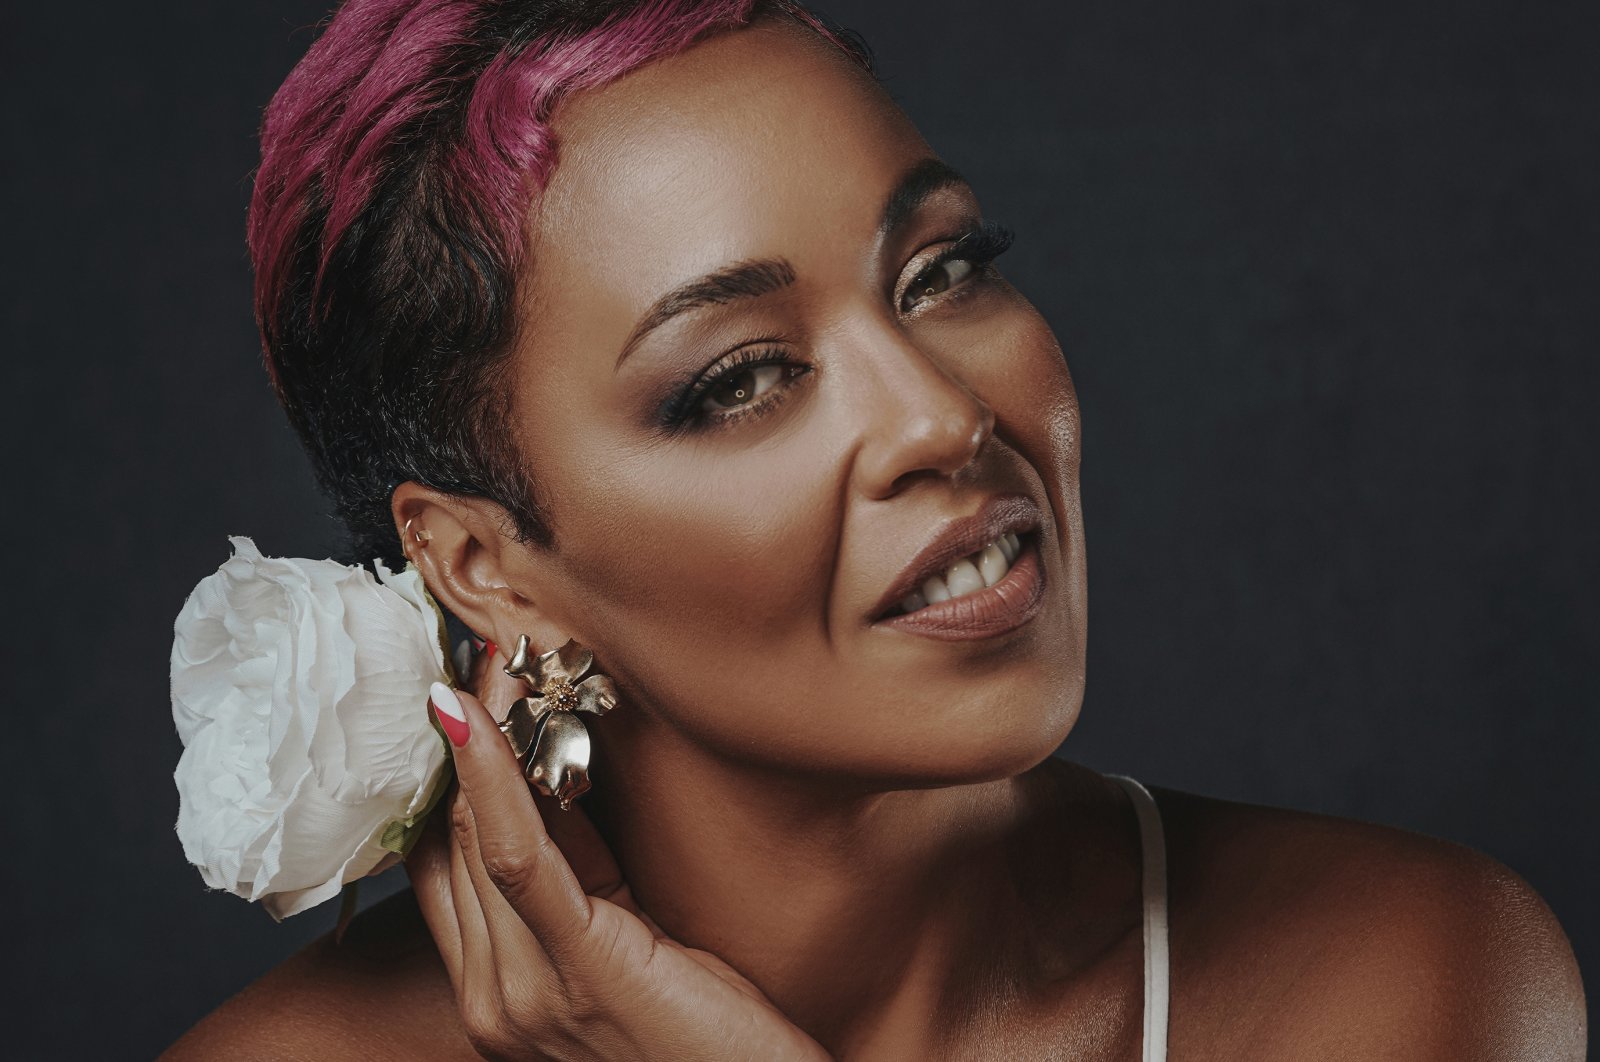 Maya Azucena brings New York entertainment to Istanbul stages